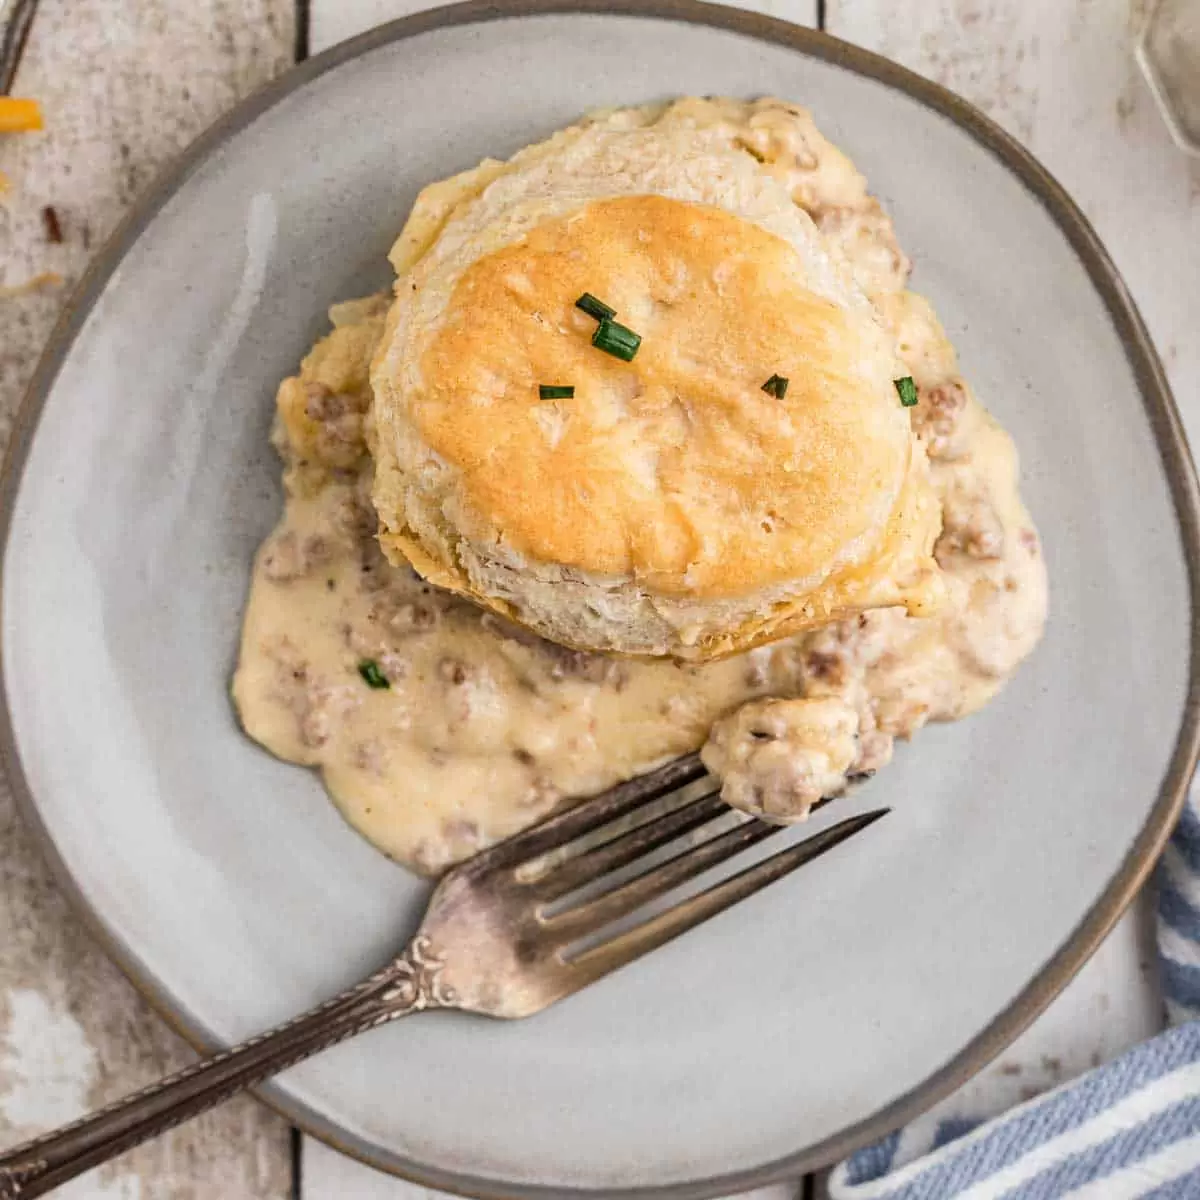 A plate withbiscuits and gravy casserole on it.